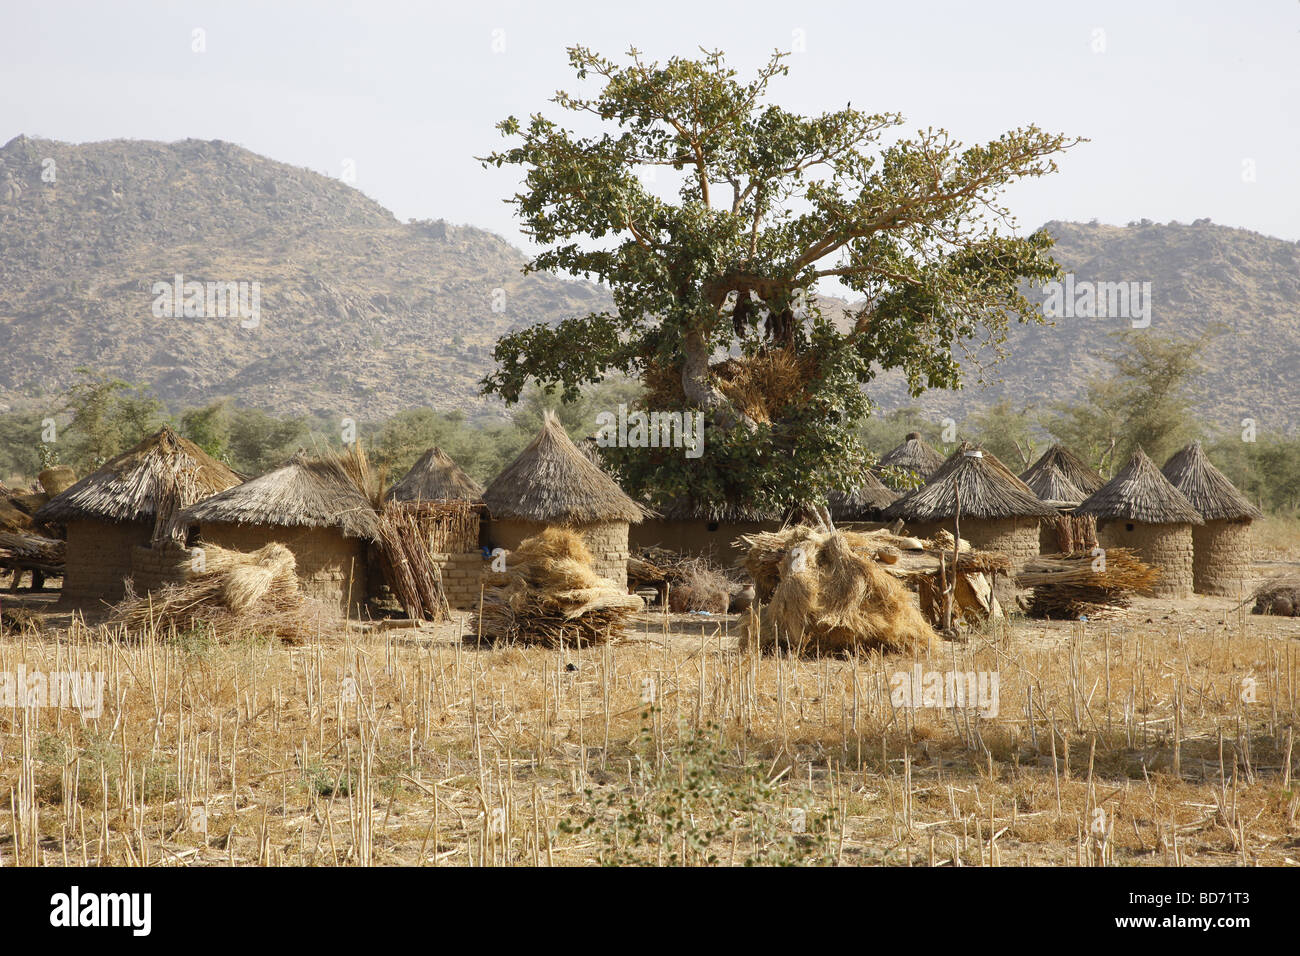 Village with round huts near Mora, Cameroon, Africa Stock Photo